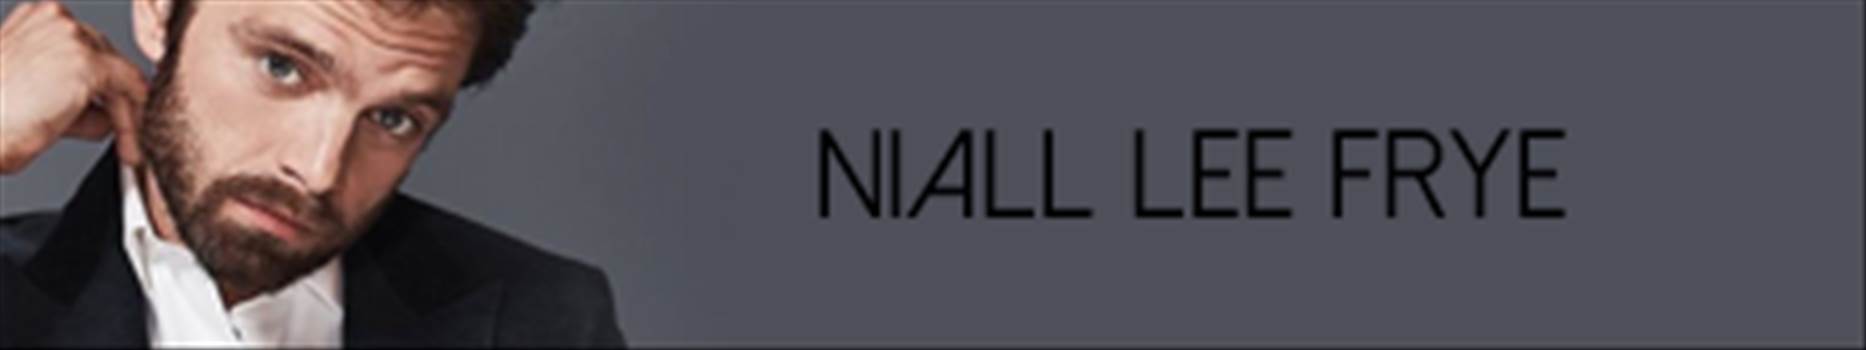 niall_tracker.png - 